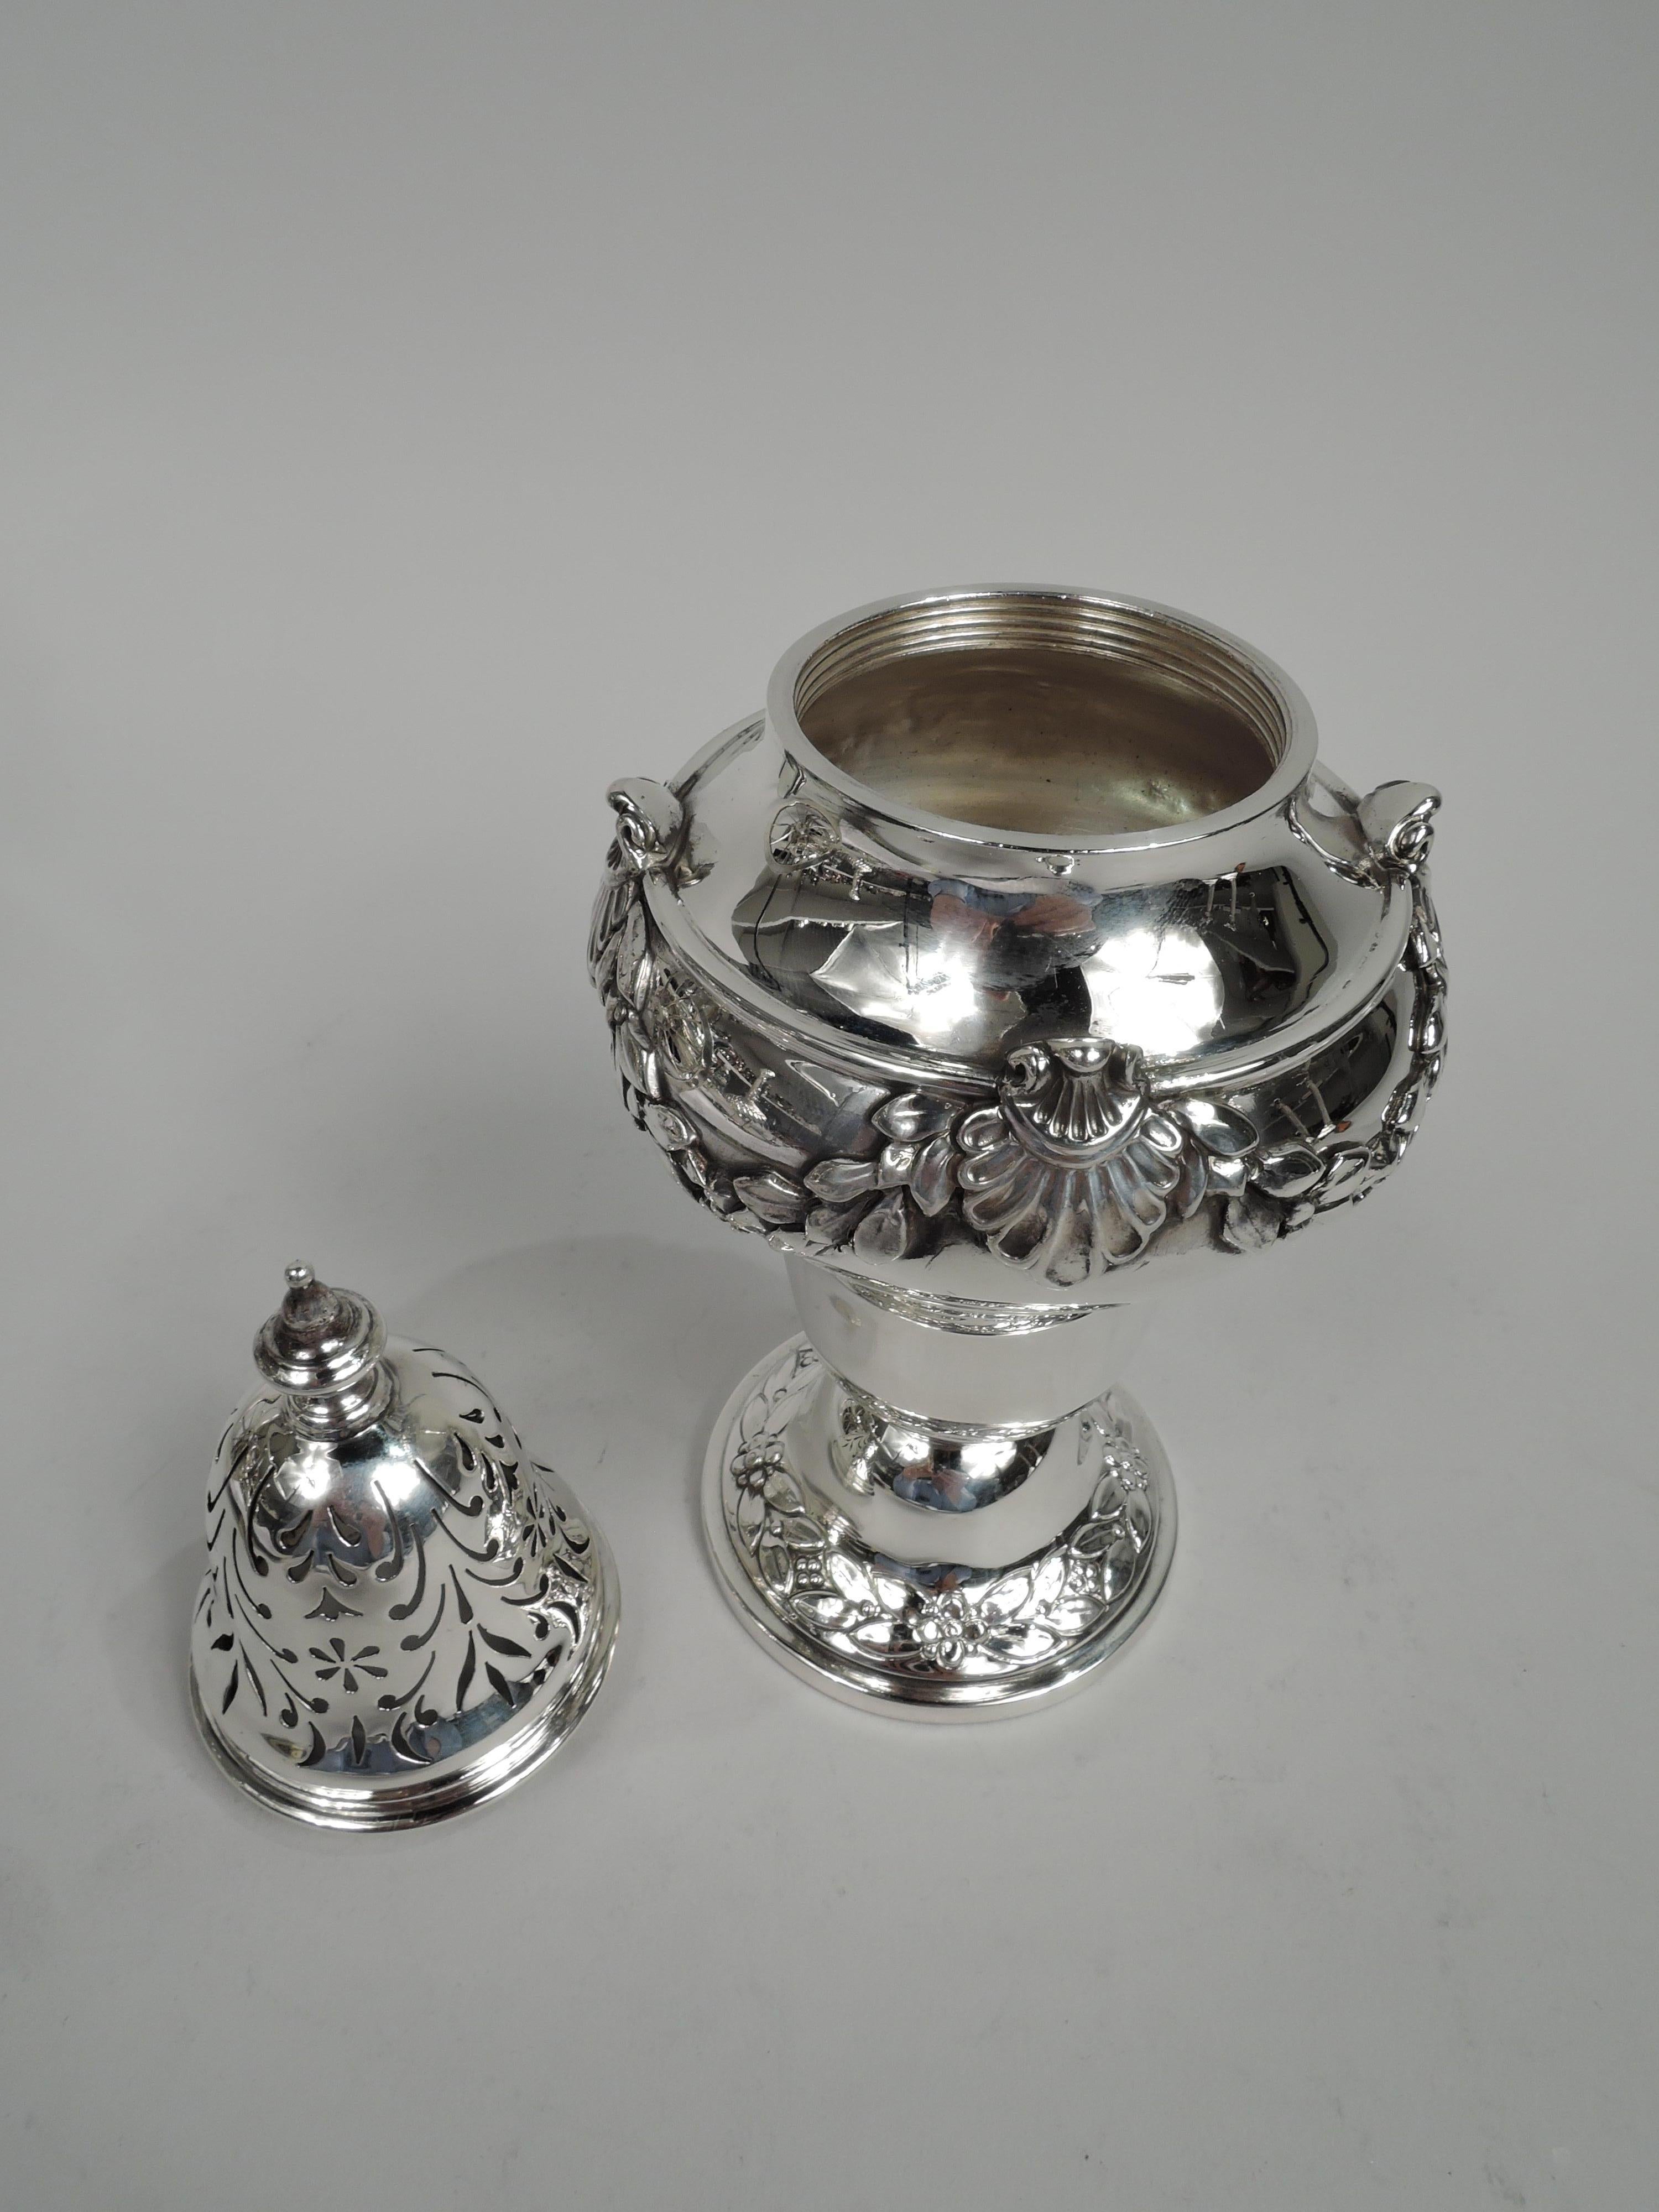 George V sterling silver sugar caster. Made by Asprey & Co. in London in 1911. Baluster with applied shell-mounted garland. Foot domed with chased leaf and flower border. Cover threaded and domed with ornamental piercing and vasiform finial. Pretty